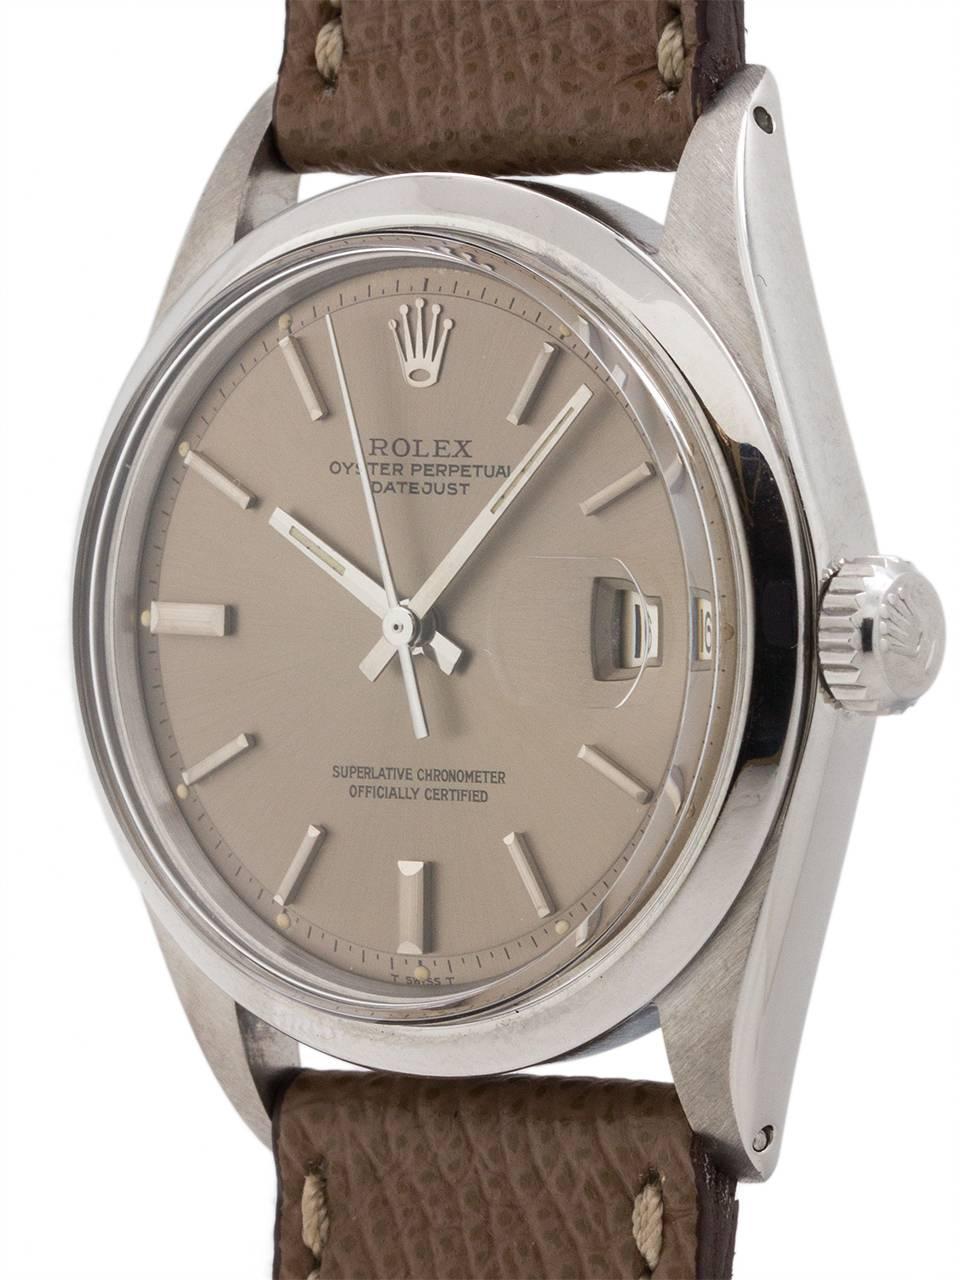 Vintage Rolex Datejust ref# 1600 with smooth bezel and original taupe dial case serial # 2.9 million circa 1971. Featuring a 36mm diameter case with original smooth bezel, acrylic crystal, and great looking original taupe/dark gray pie pan dial with